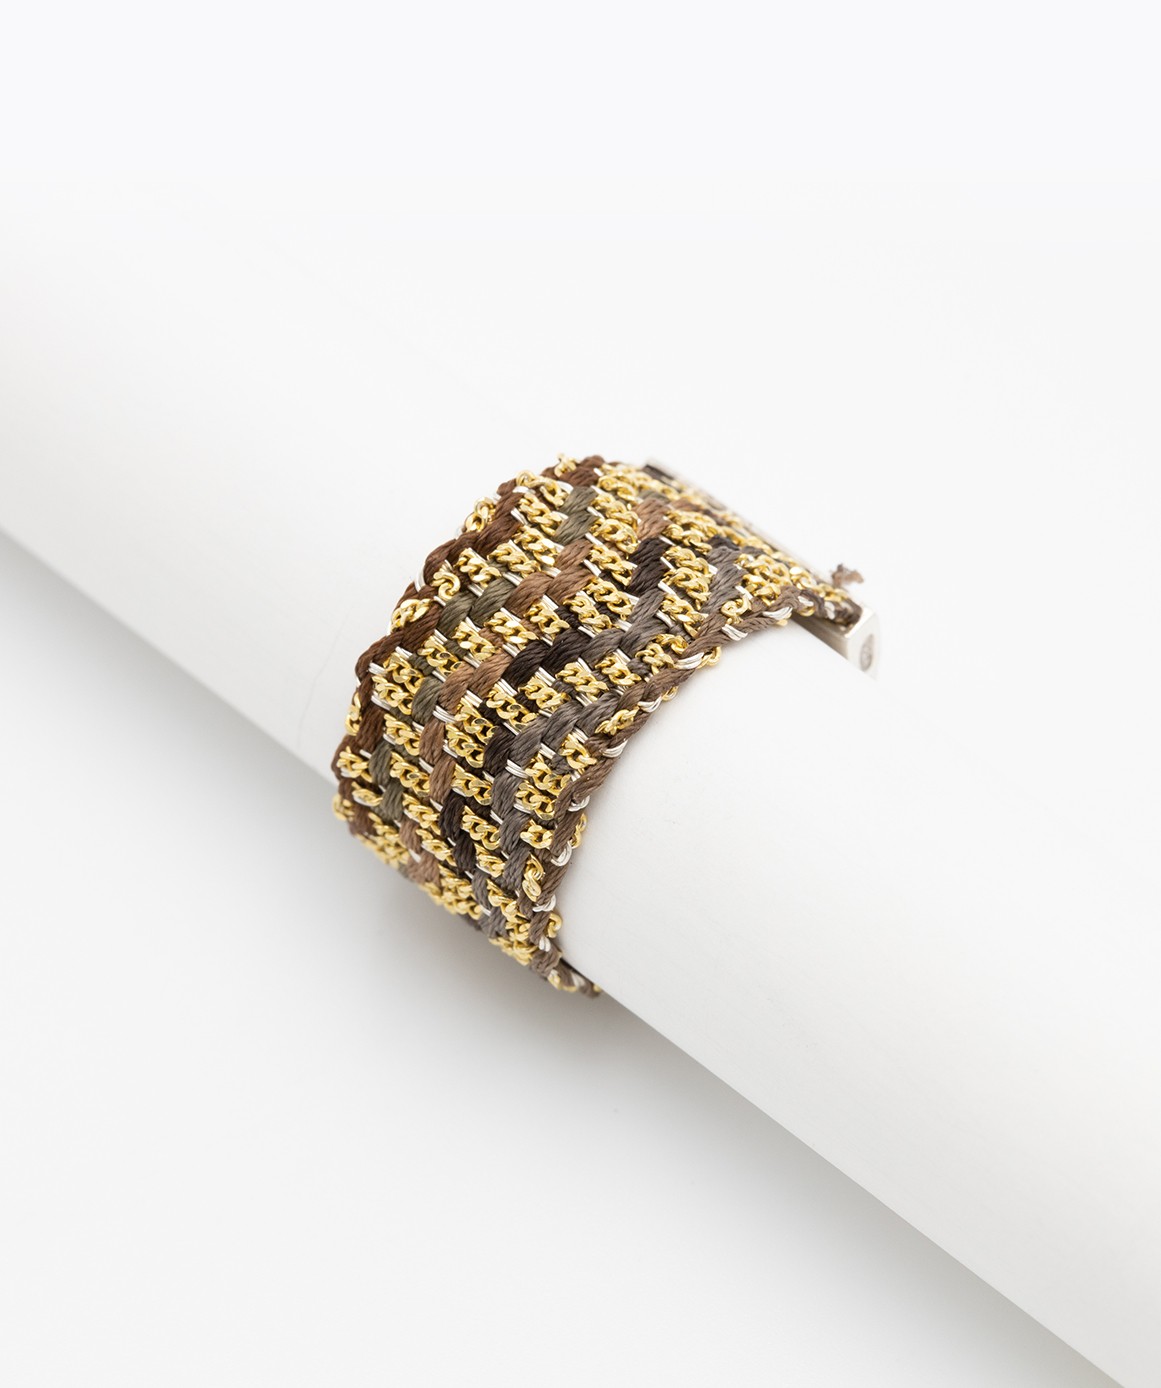 ZIG ZAG Ring in Sterling Silver 18Kt. Gold plated. Fabric: Silk Shades of Brown